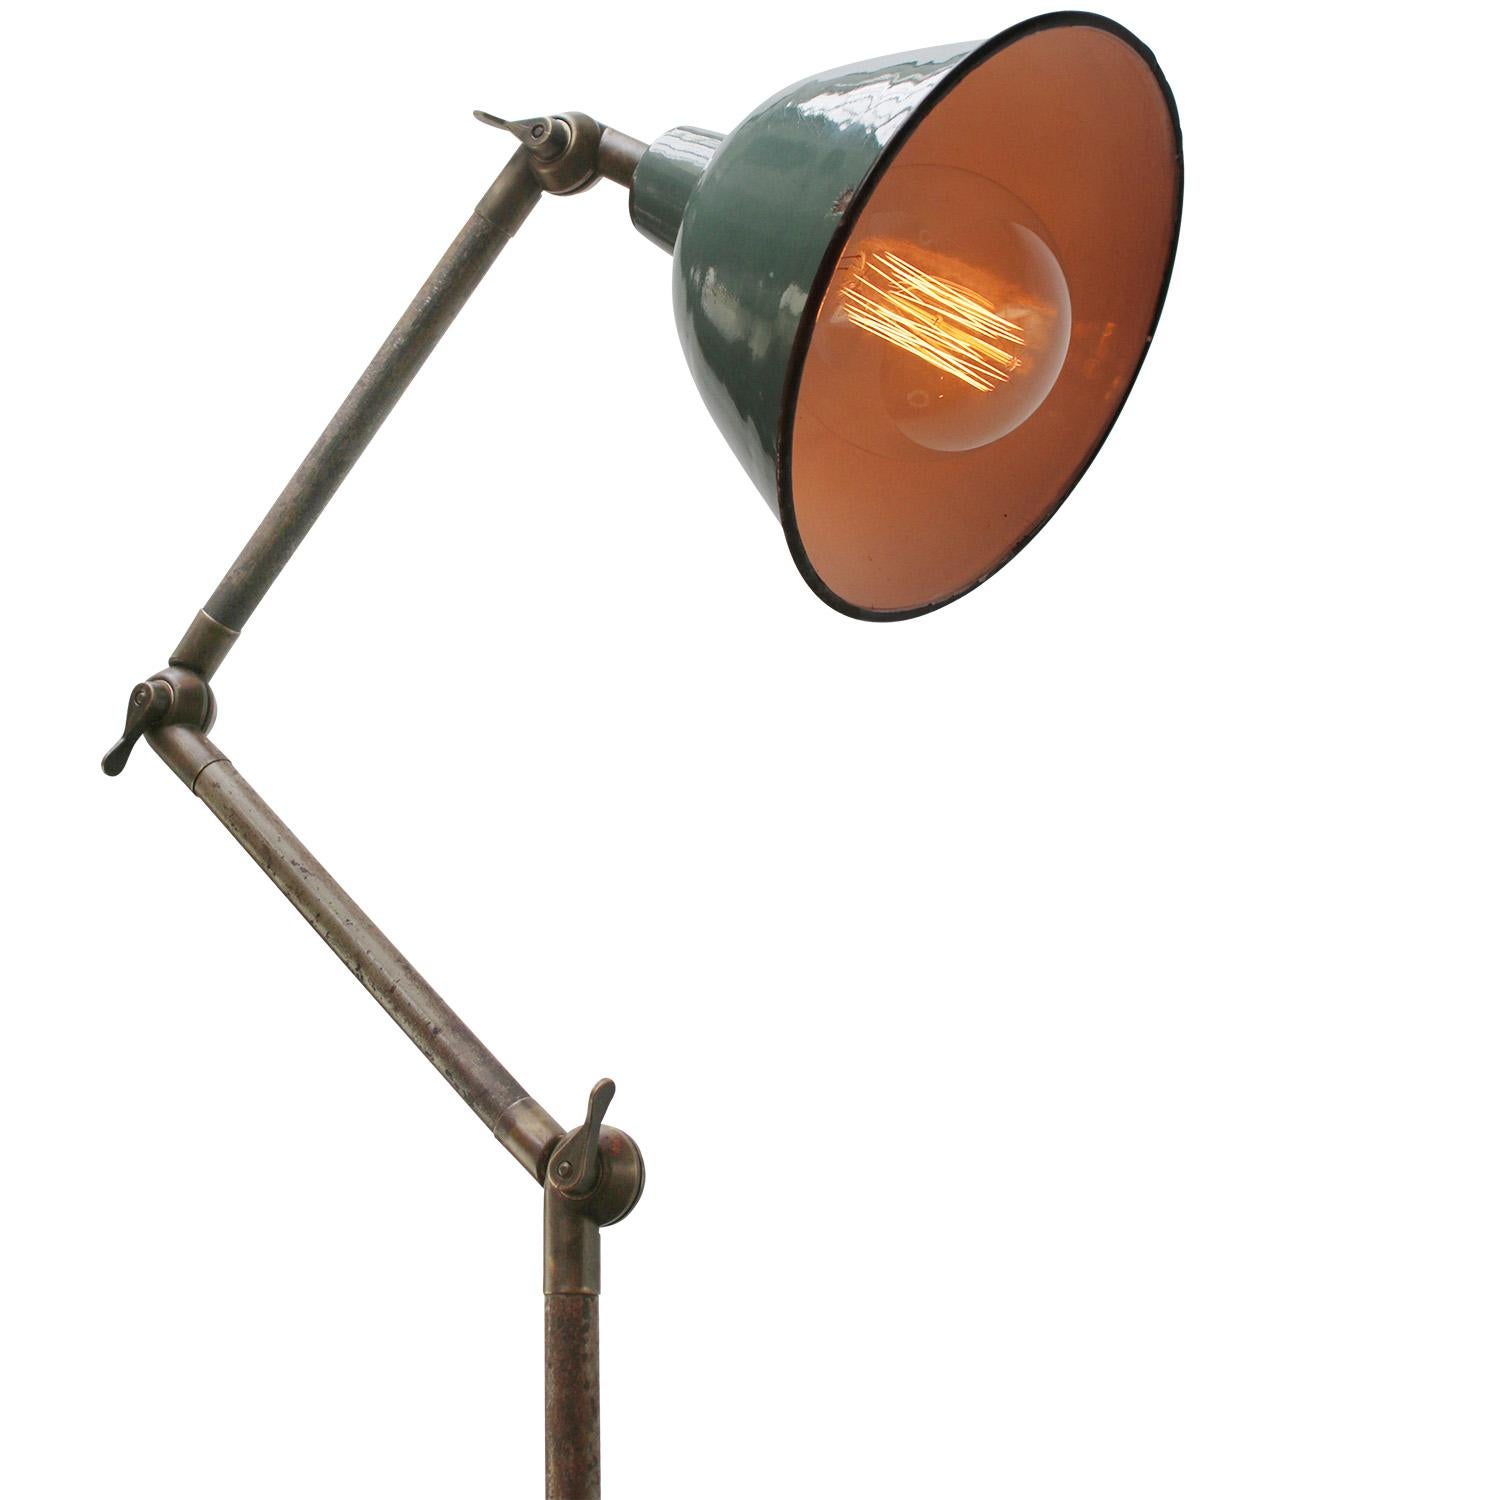 Petrol Enamel Vintage industrial workshop floor lamp
Cast iron with brass joints
Adjustable in angle.

Height to first joint 105 cm

Diameter foot 23 cm

Electric wire 2 meter / 80” with plug and floor switch

Available with UK / US plug

Priced per